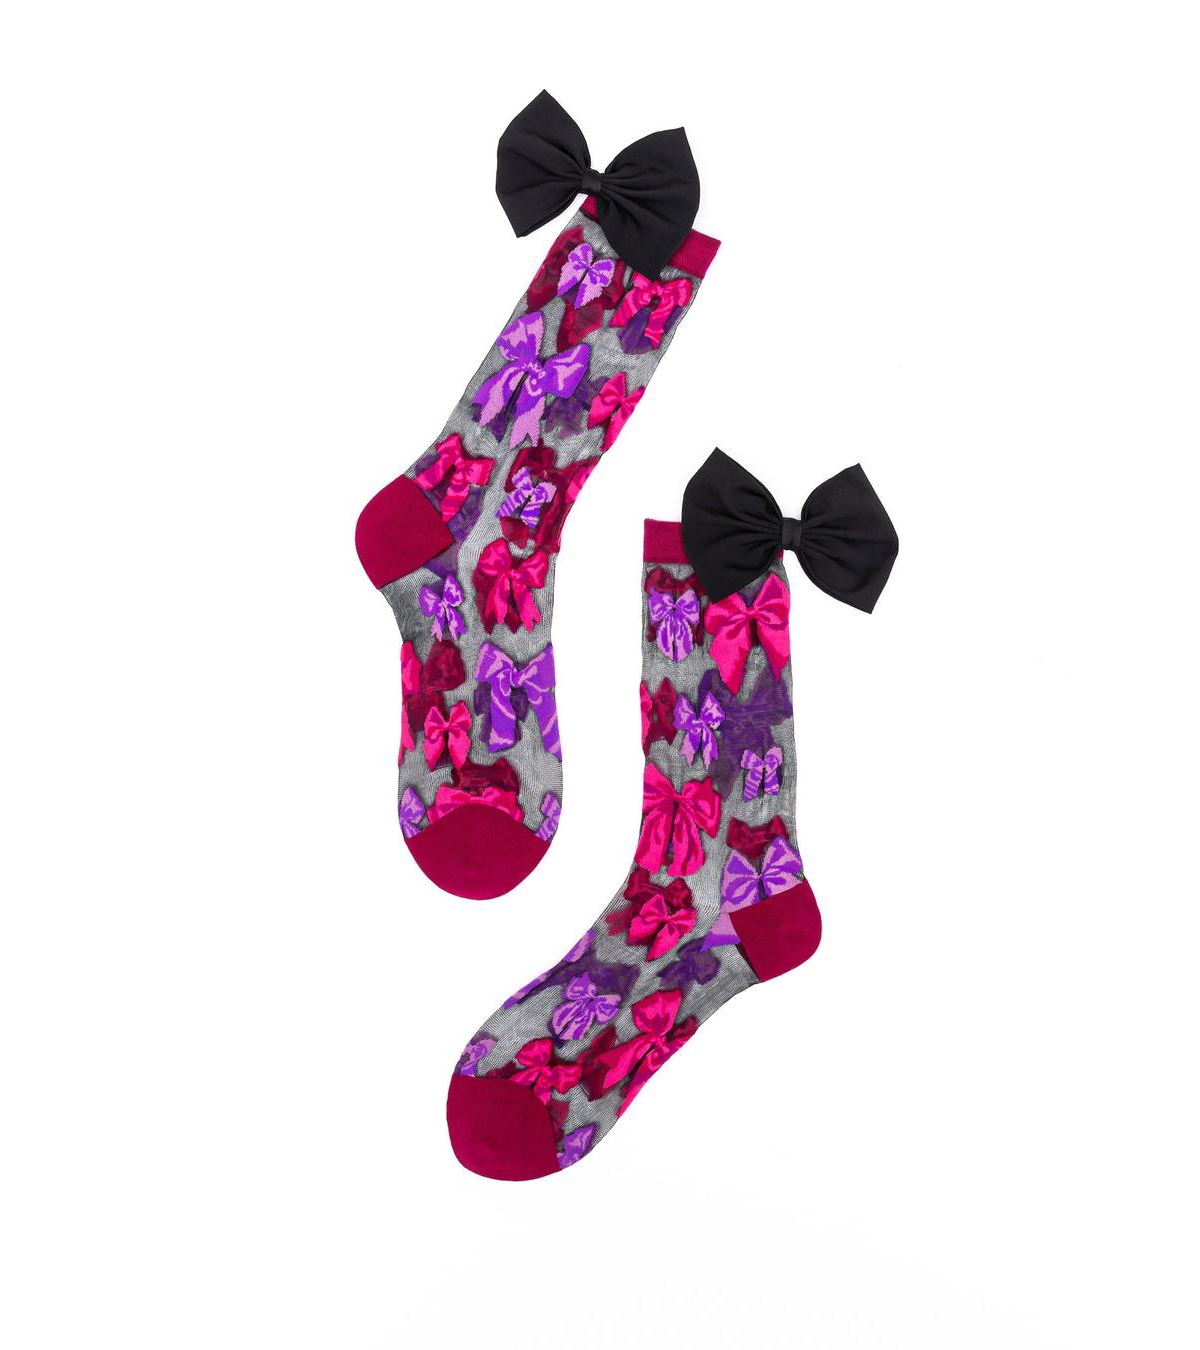 Sock Candy Big Bow Energy Black Sheer Sock In Black, Women's At Urban Outfitters